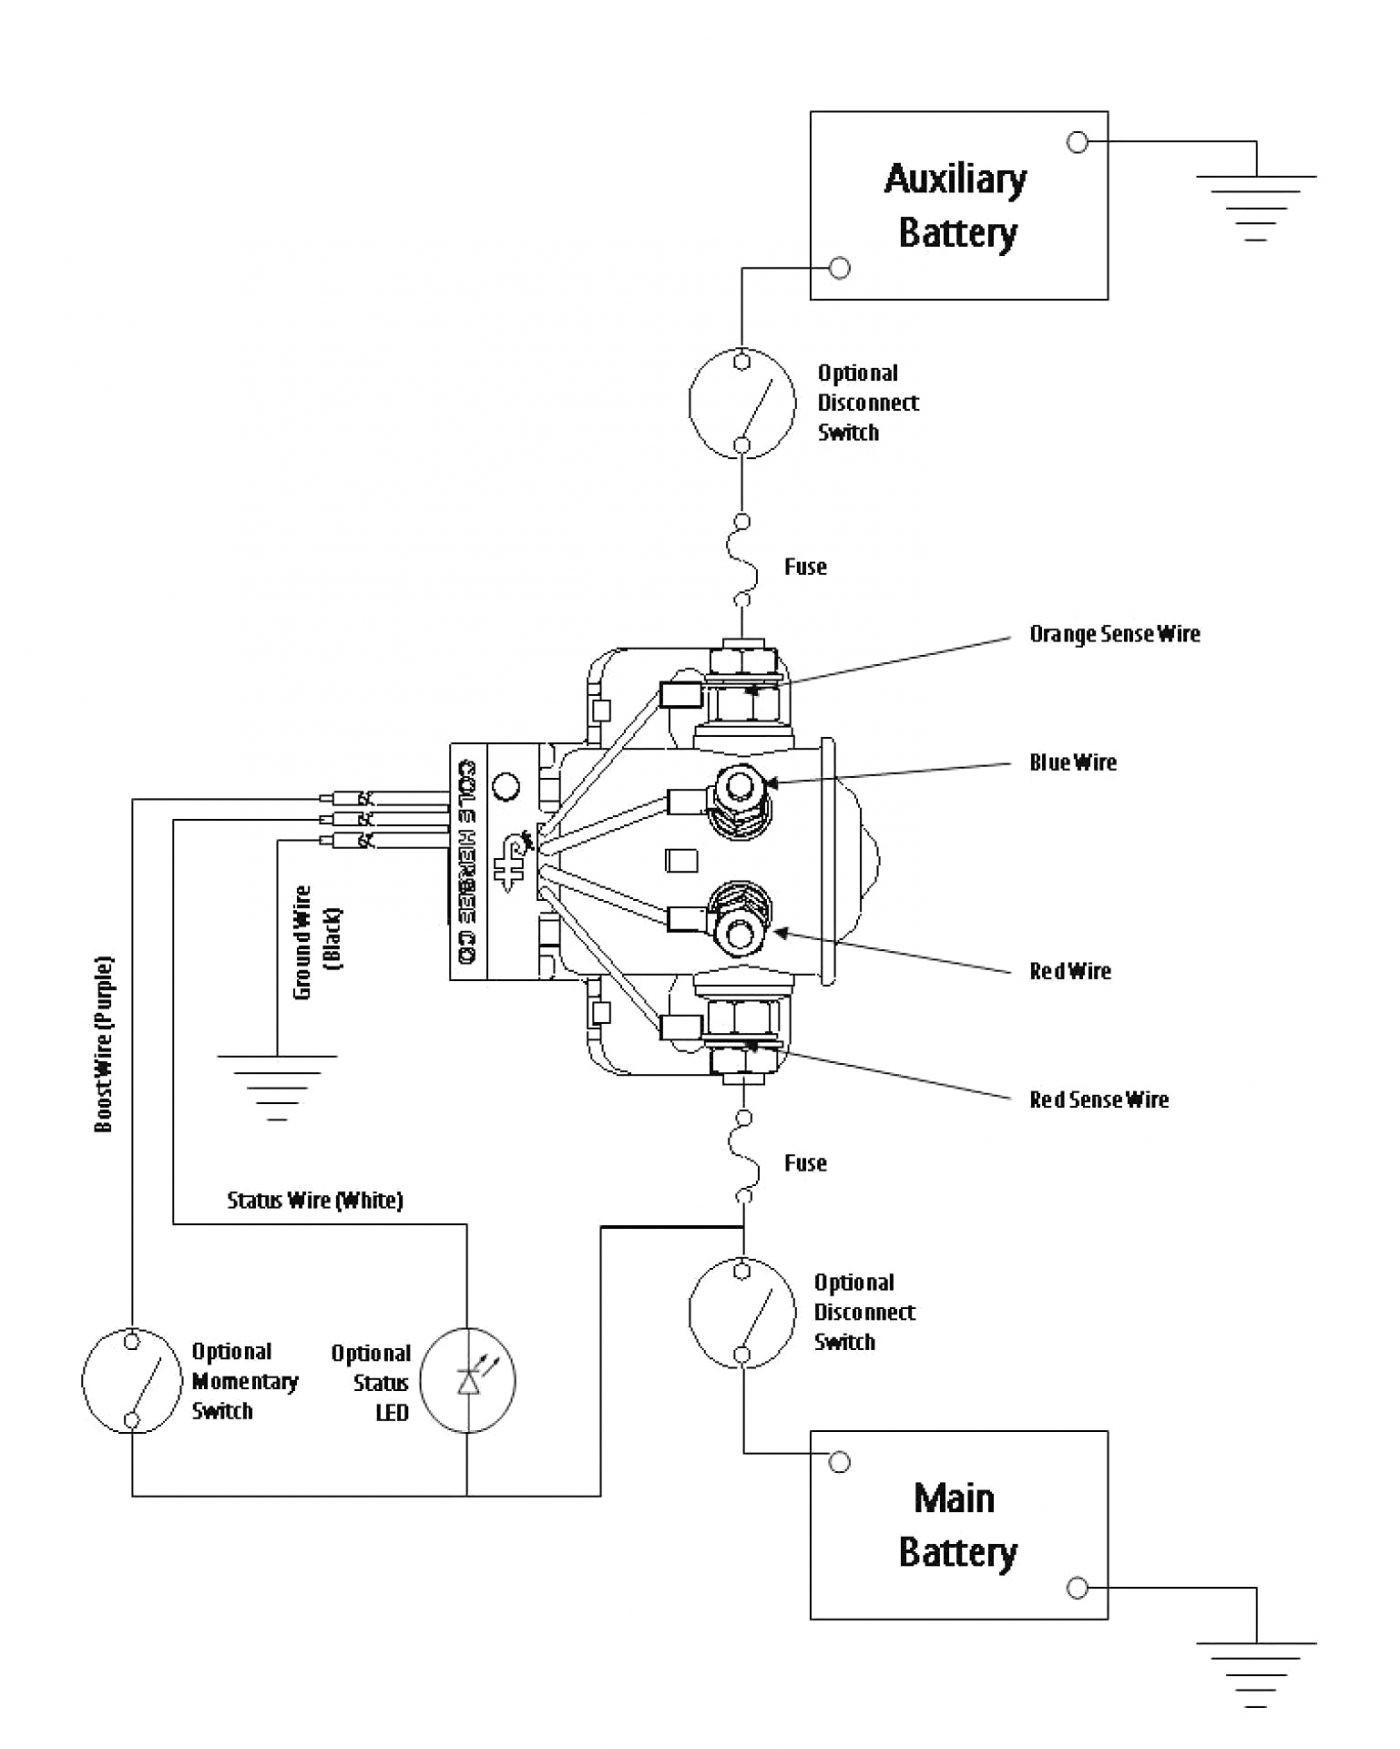 Ac Disconnect Wiring Diagram Valid Ac isolator Wiring Diagram Fresh Rv Battery Disconnect Switch Wiring